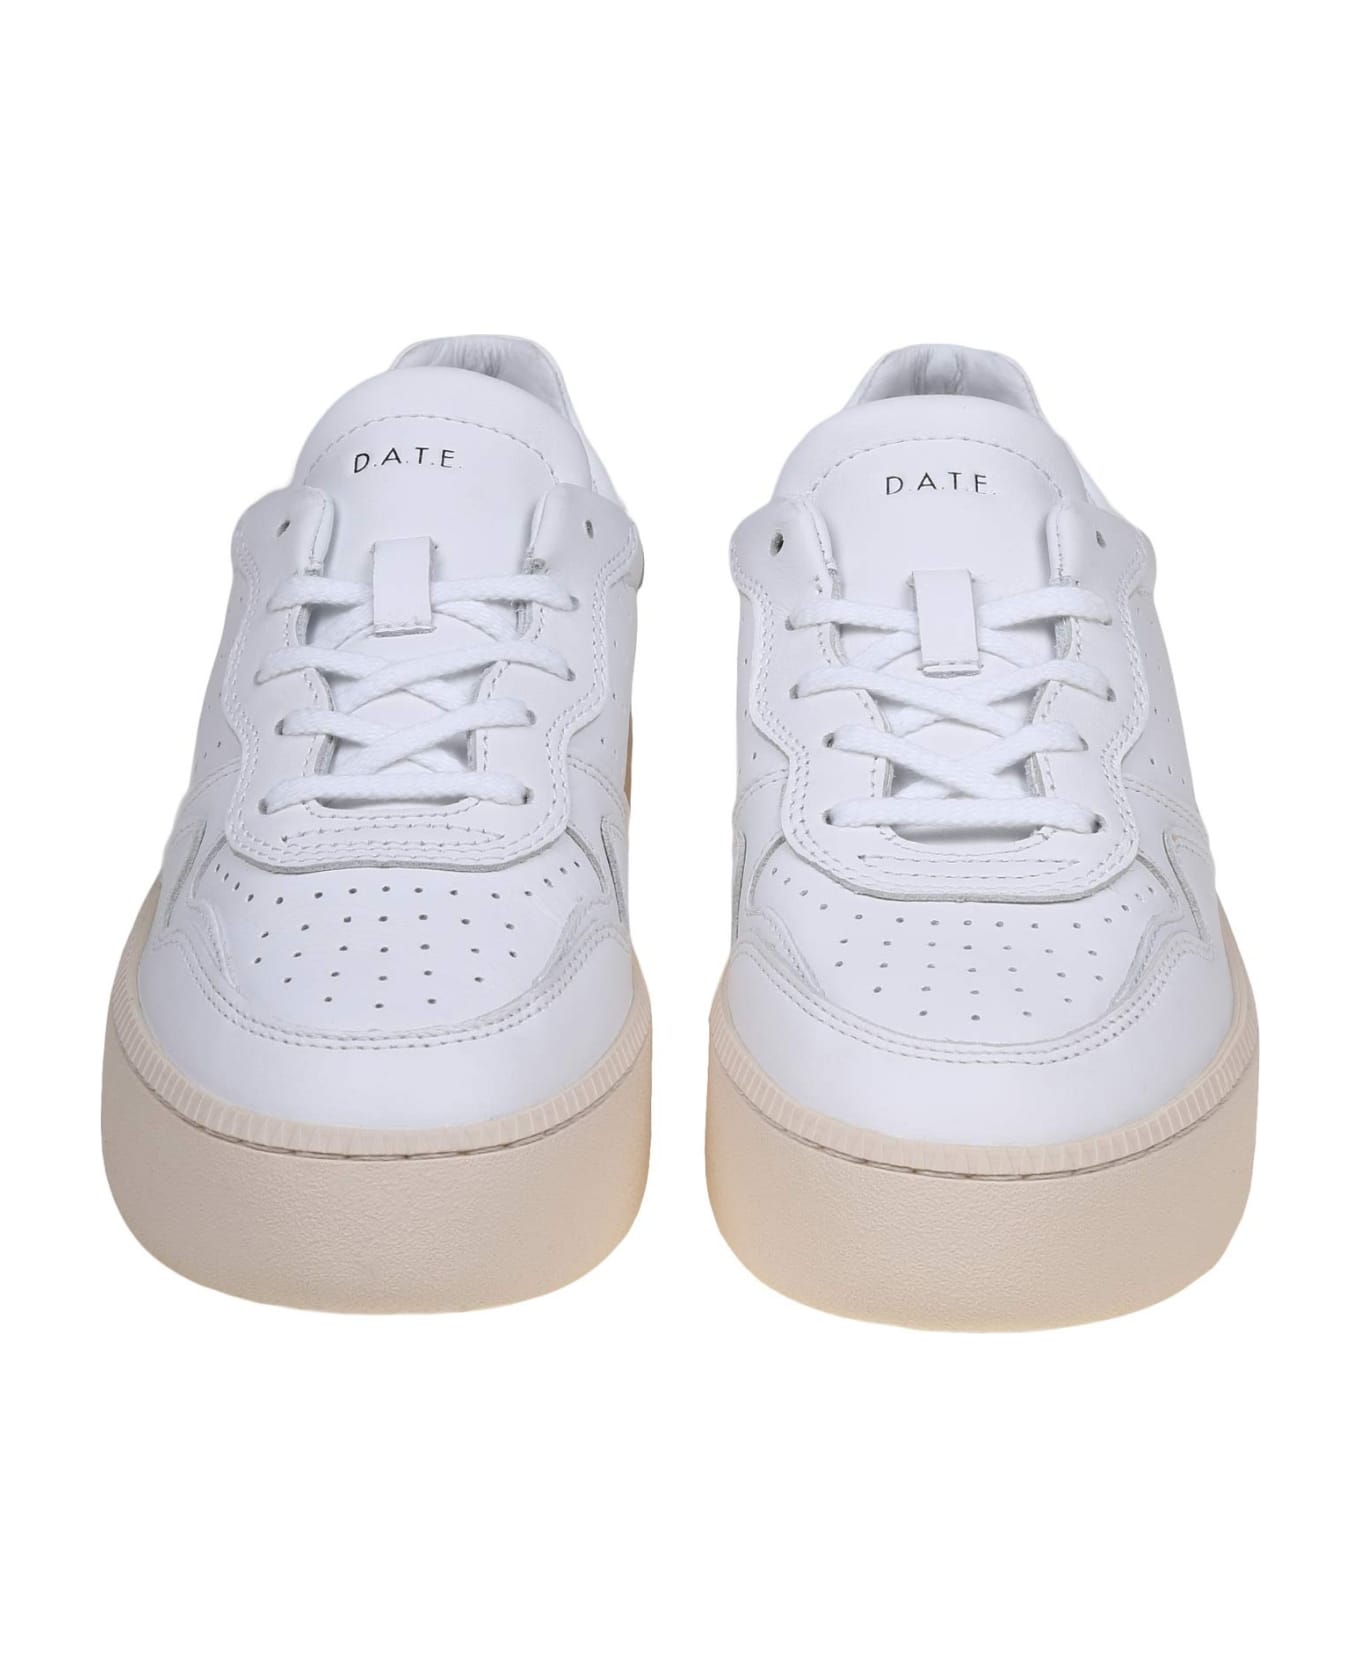 D.A.T.E. Step Calf Sneakers In Leather And White Color - White ウェッジシューズ